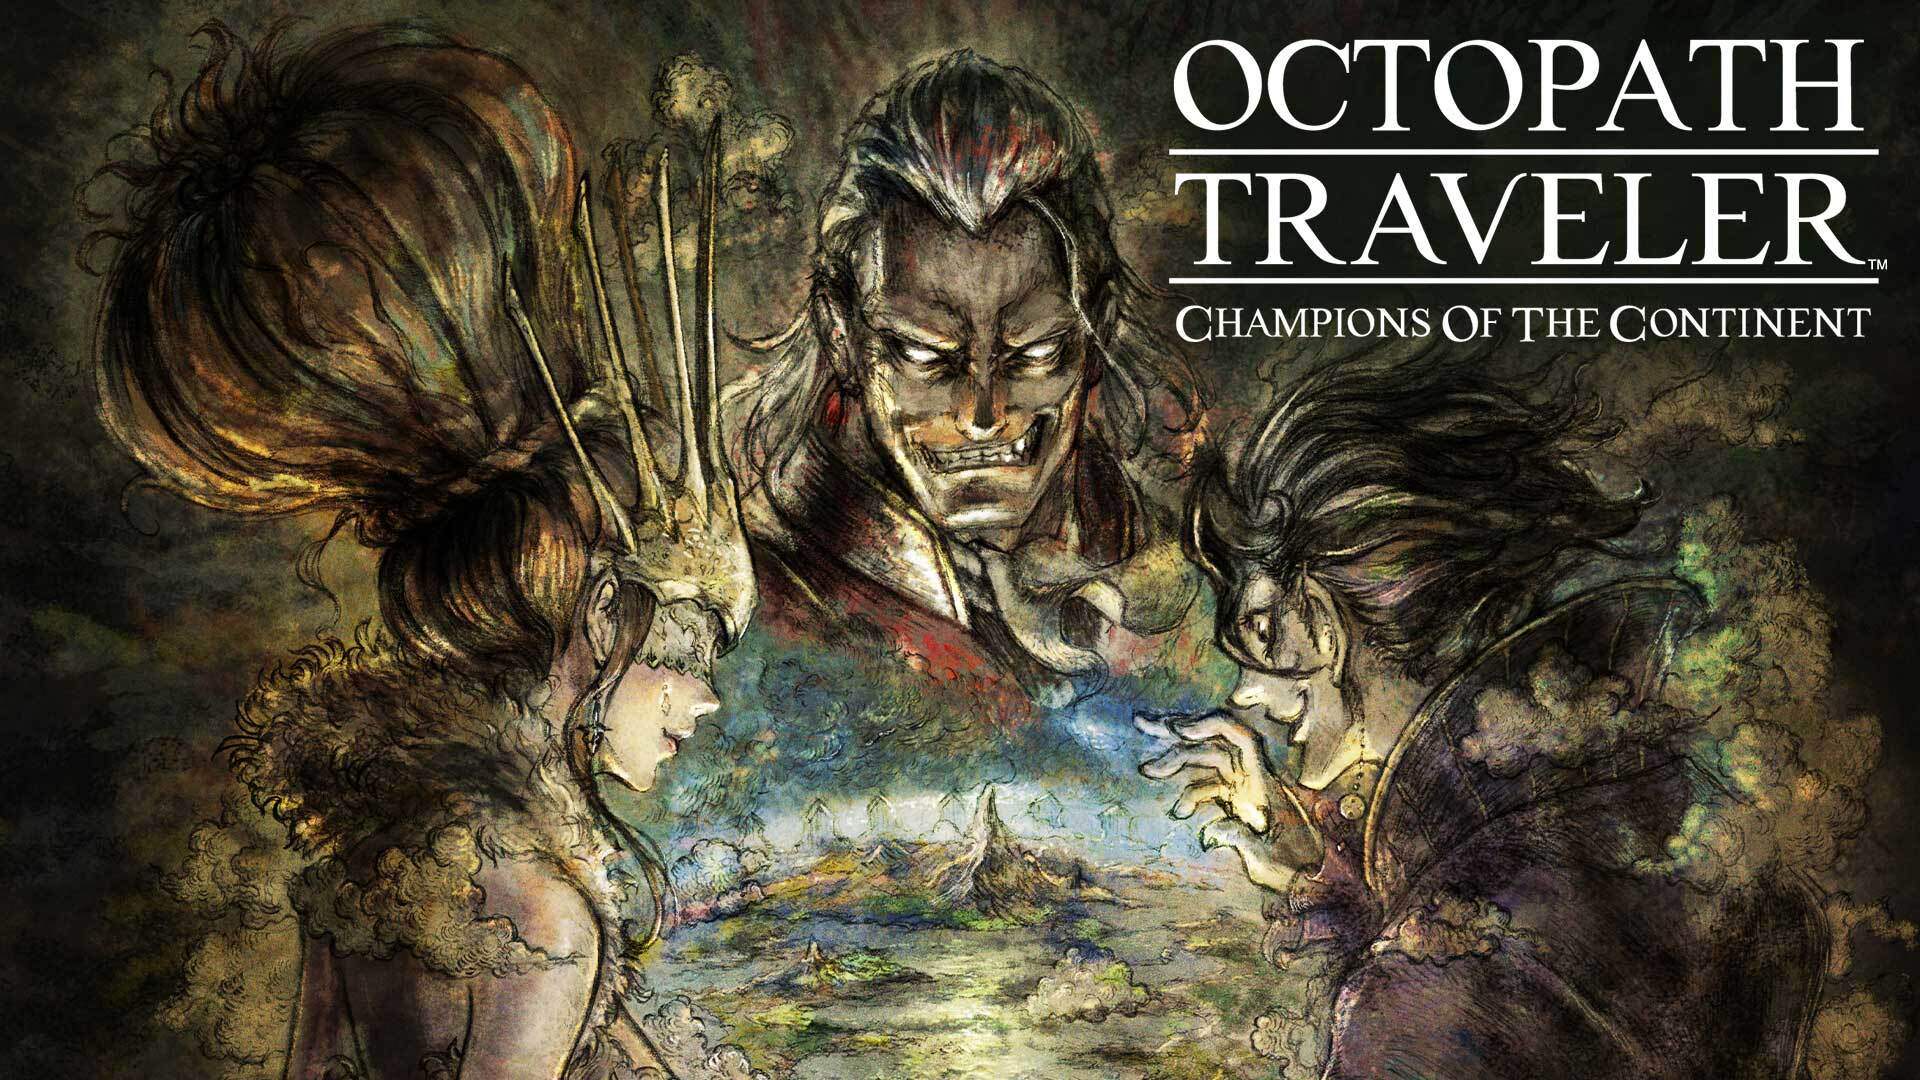 OCTOPATH TRAVELER: Champions of the Continent Artwork